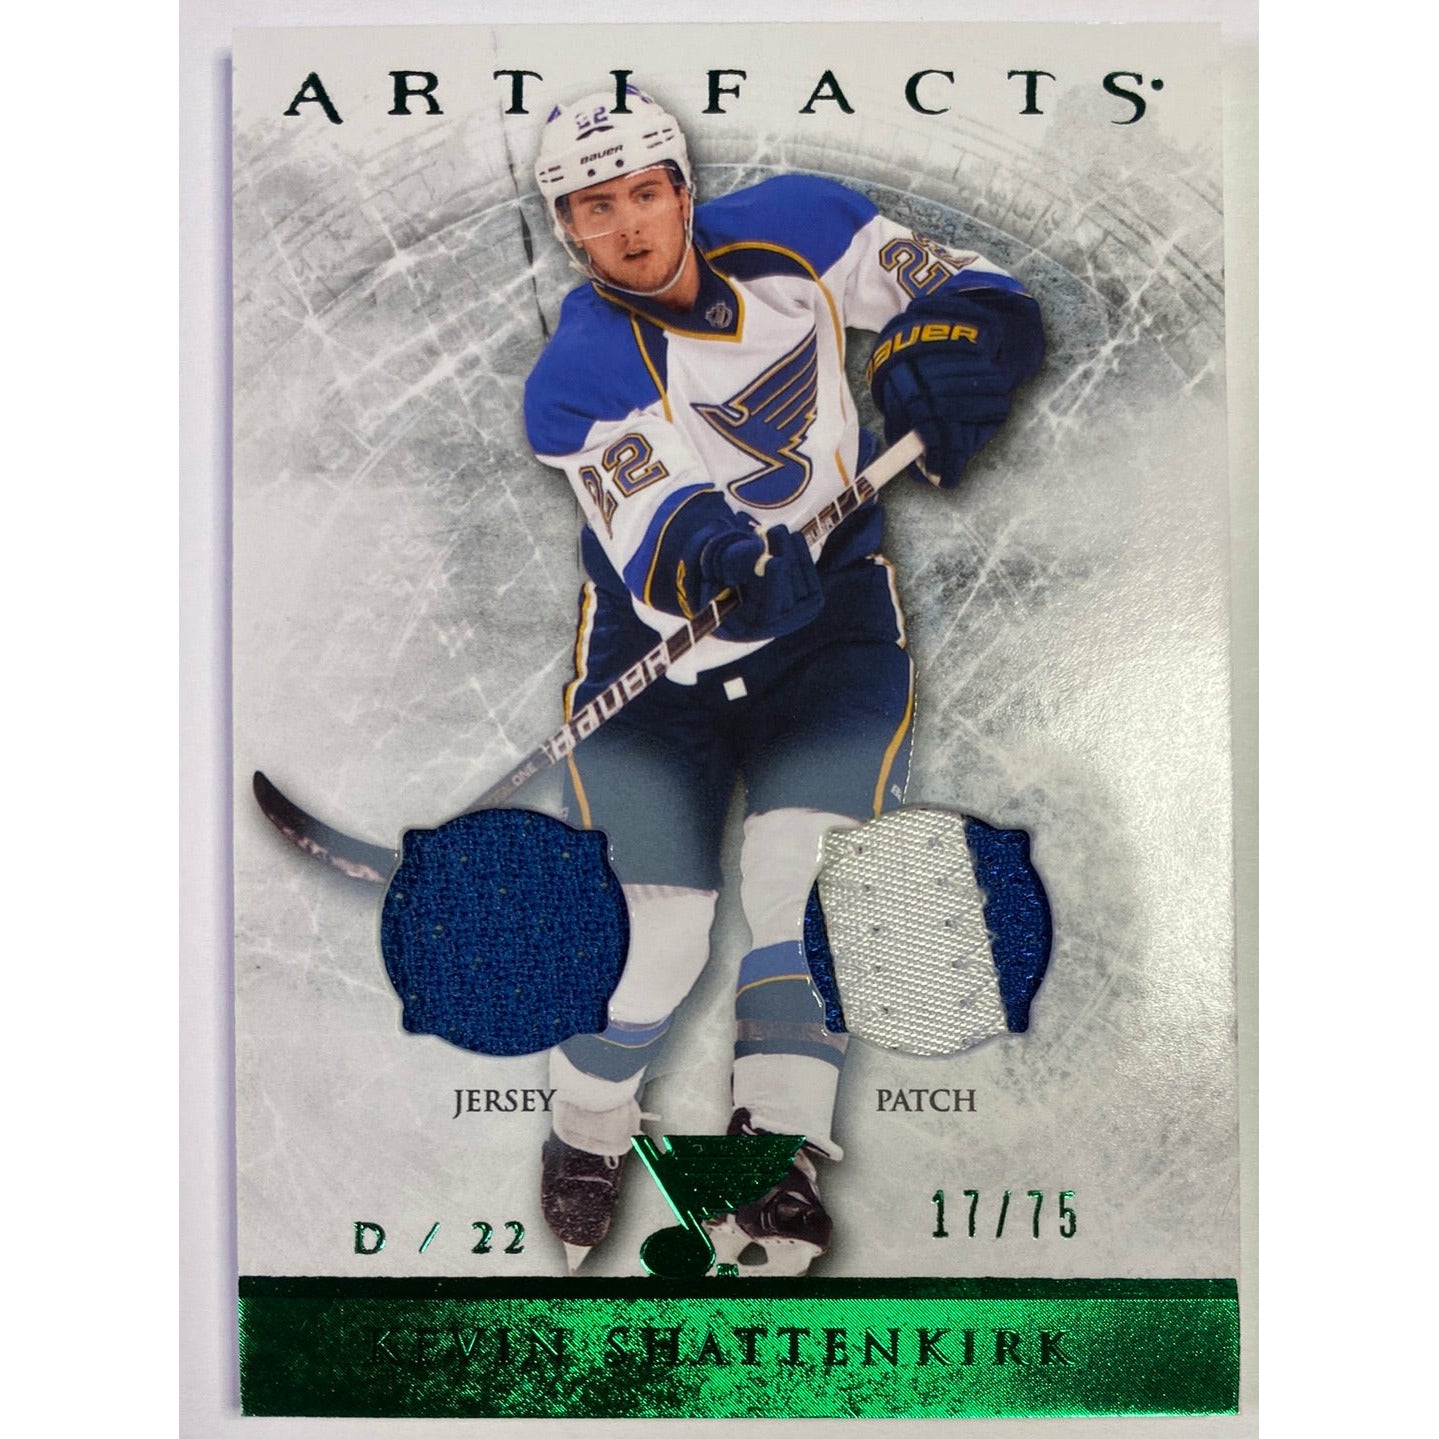  2012-13 Artifacts Kevin Shattenkirk Emerald Dual Patch /75  Local Legends Cards & Collectibles